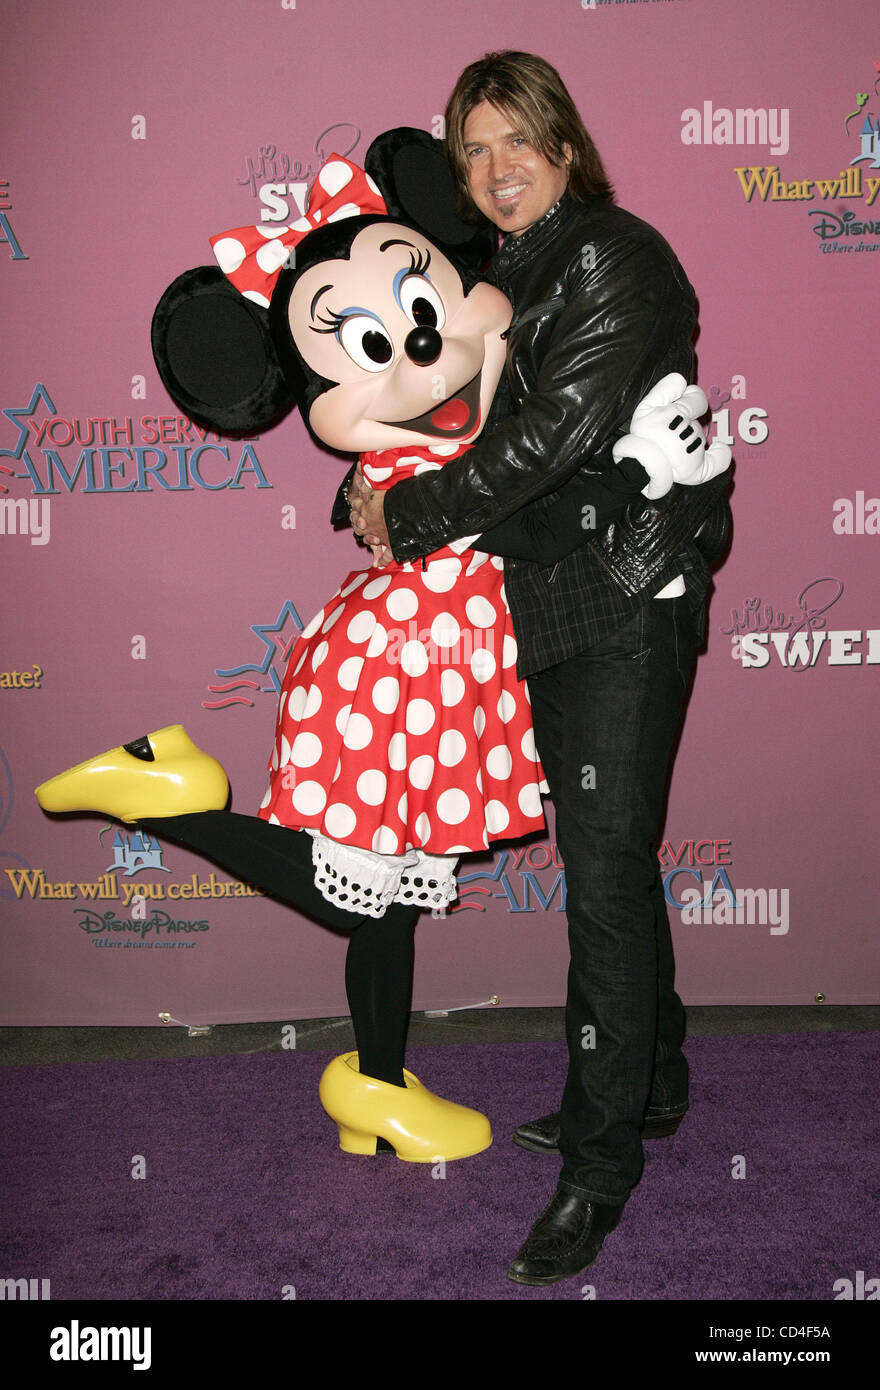 Oct 05, 2008 - Anaheim, California, USA - Country music singer, songwriter and actor BILLY RAY CYRUS with MINNIE MOUSE at the Miley Cyrus Sweet 16 Birthday Party held at Disneyland in Anaheim. (Credit Image: © Lisa O'Connor/ZUMA Press) Stock Photo